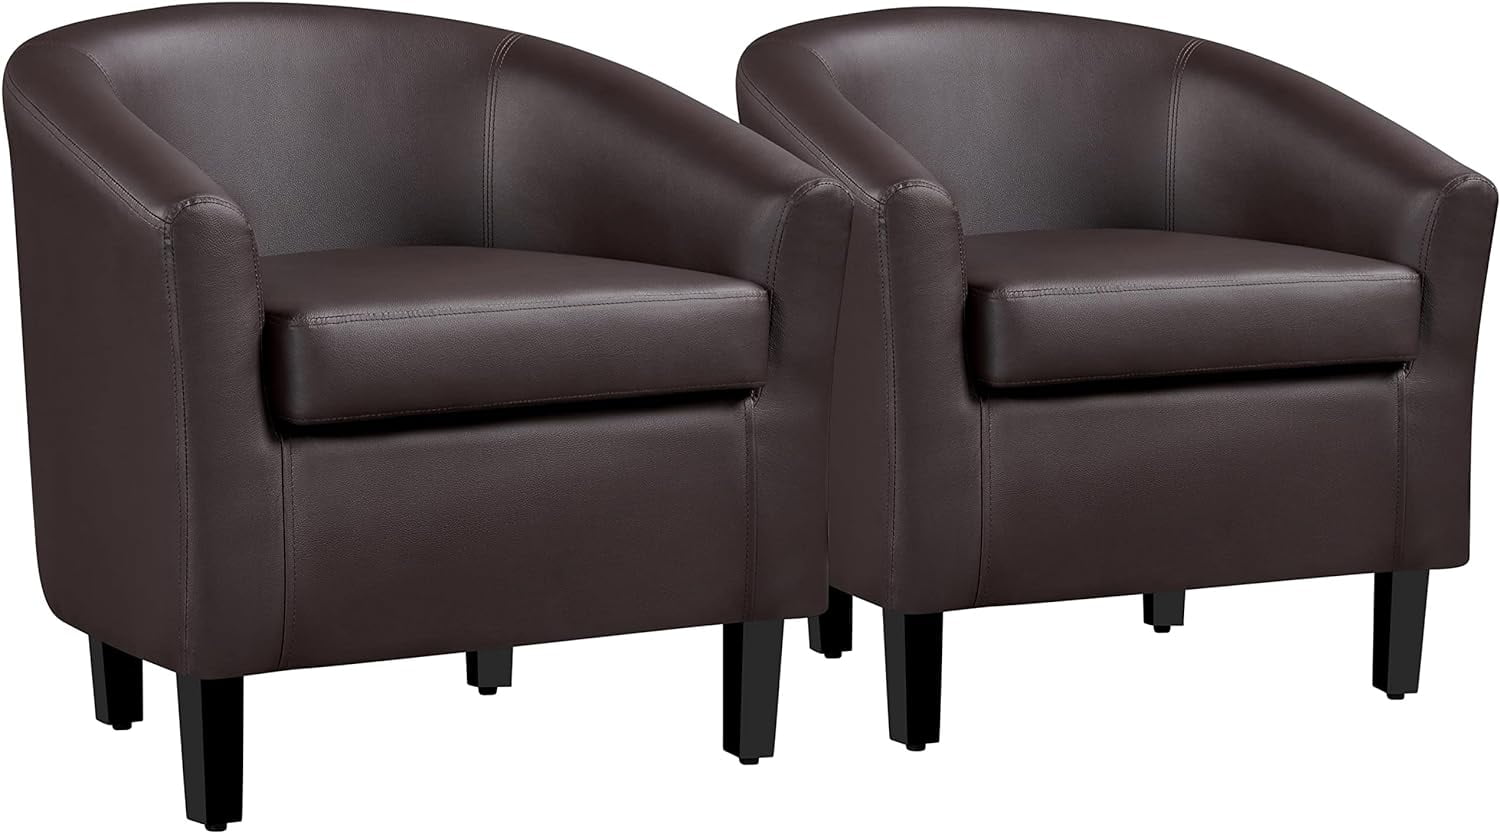 Accent Chairs, PU Leather Barrel Chairs Modern Side Chairs Comfy Club ...